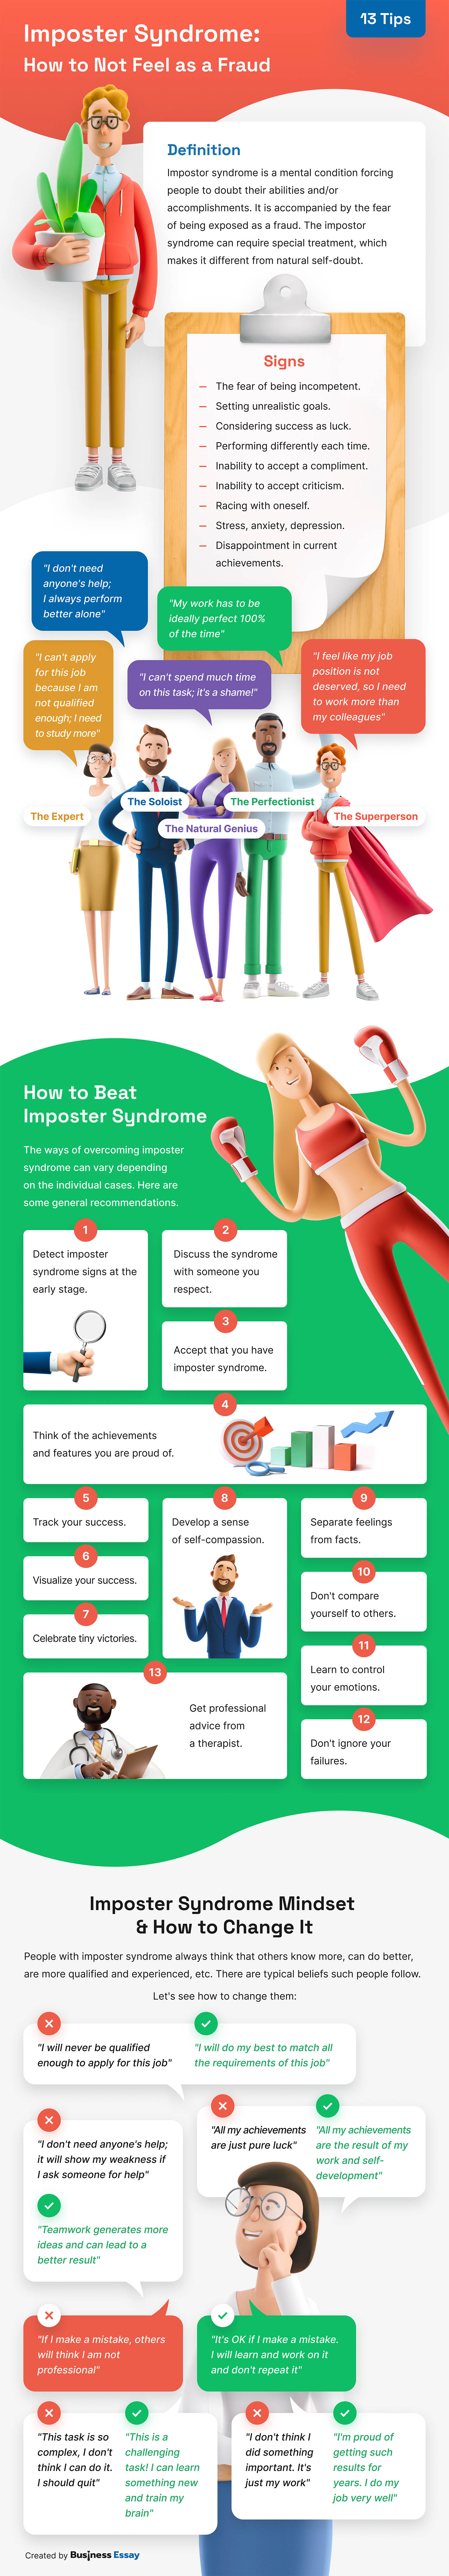 The infographic provides tips on how to fight imposter syndrome and what are its signs